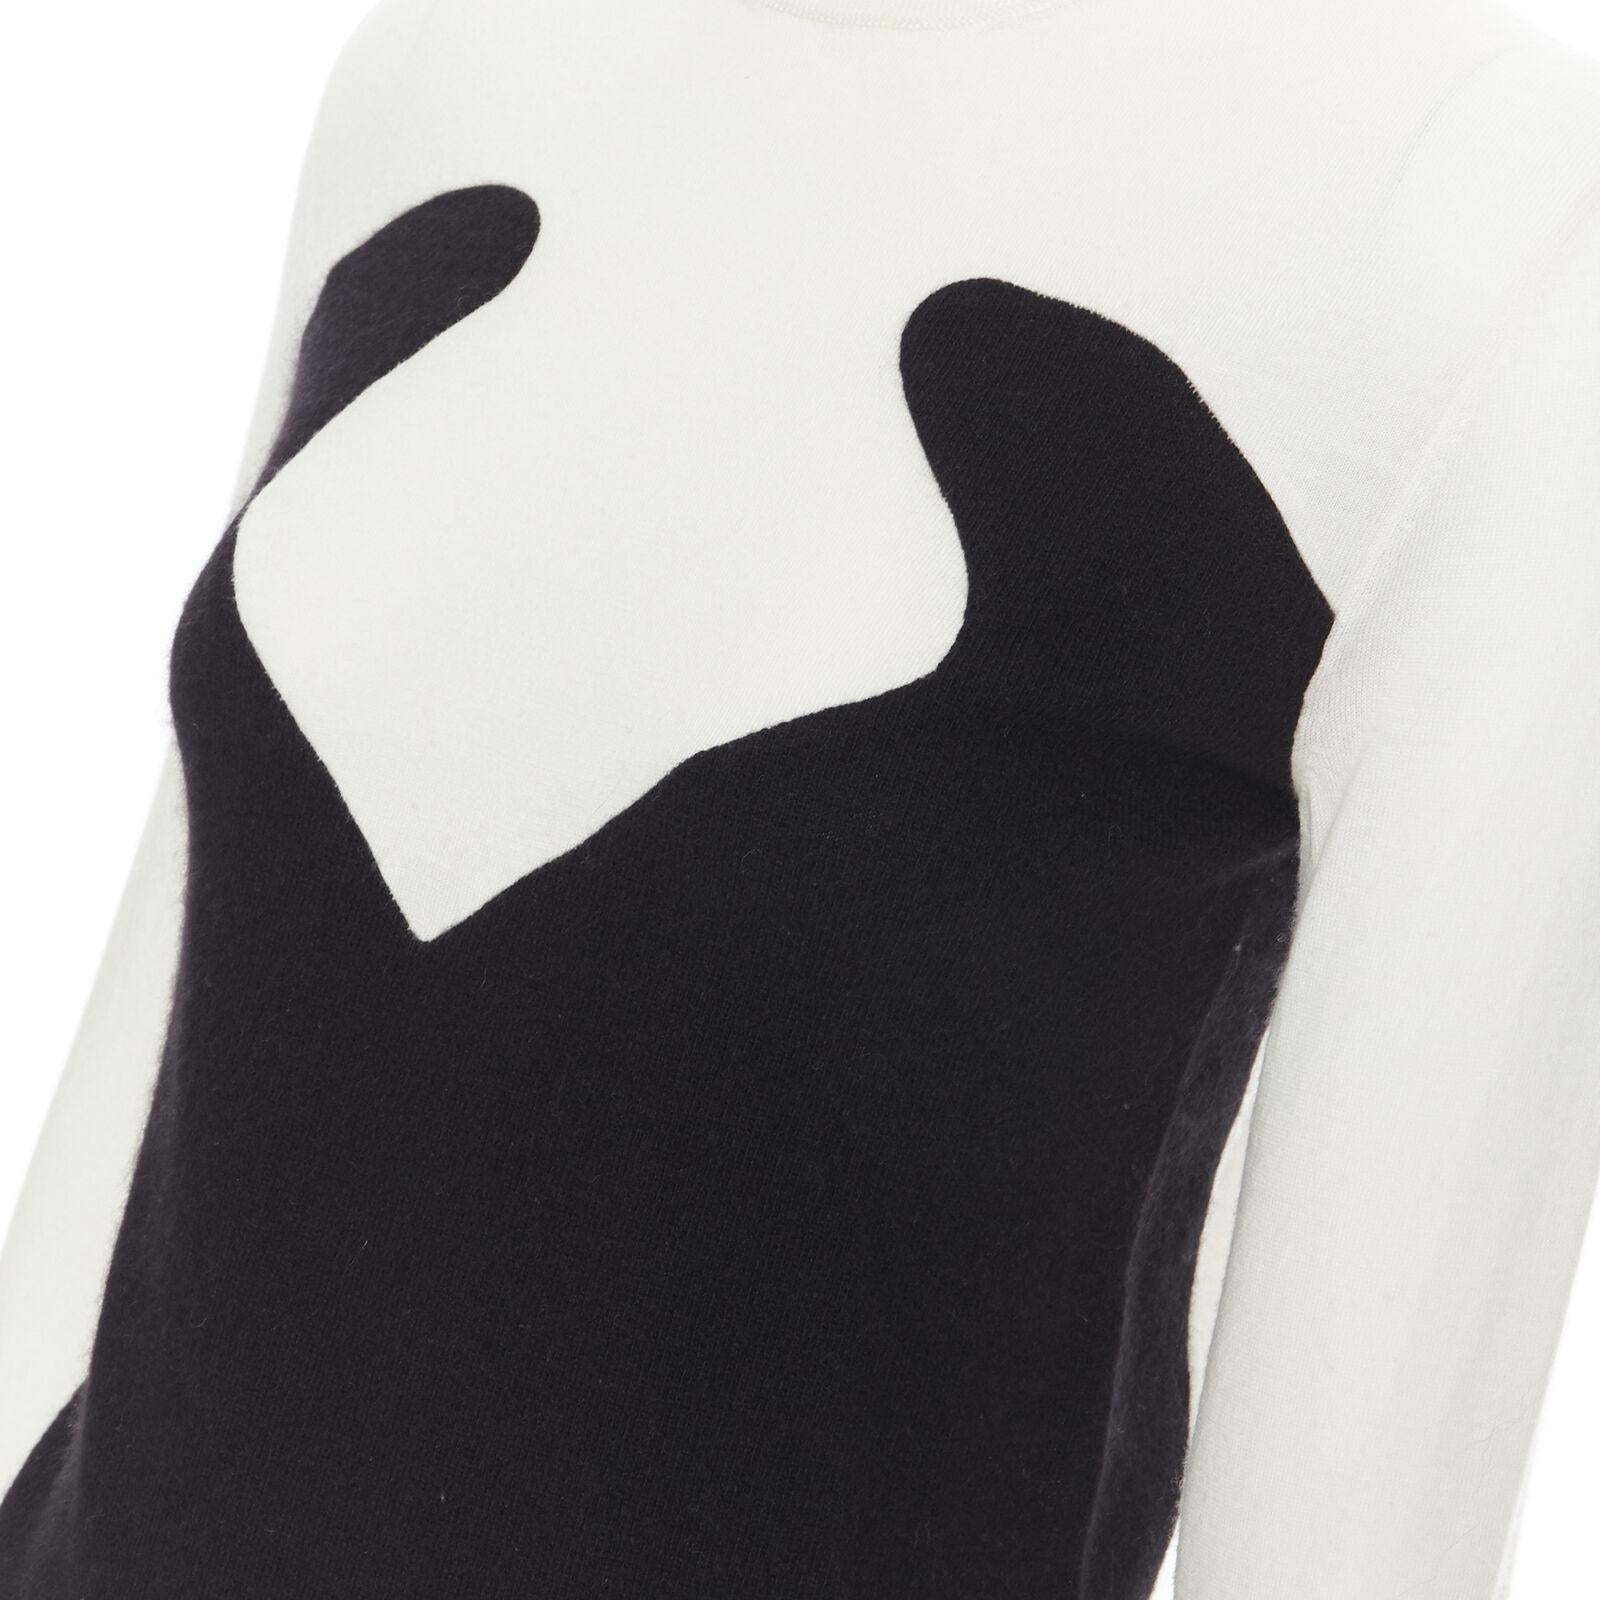 STELLA MCCARTNEY wool cashmere black white illusion turtleneck sweater IT36 XS
Reference: SNKO/A00082
Brand: Stella McCartney
Designer: Stella McCartney
Material: Wool, Cashmere
Color: Black, White
Pattern: Abstract
Extra Details: Black white